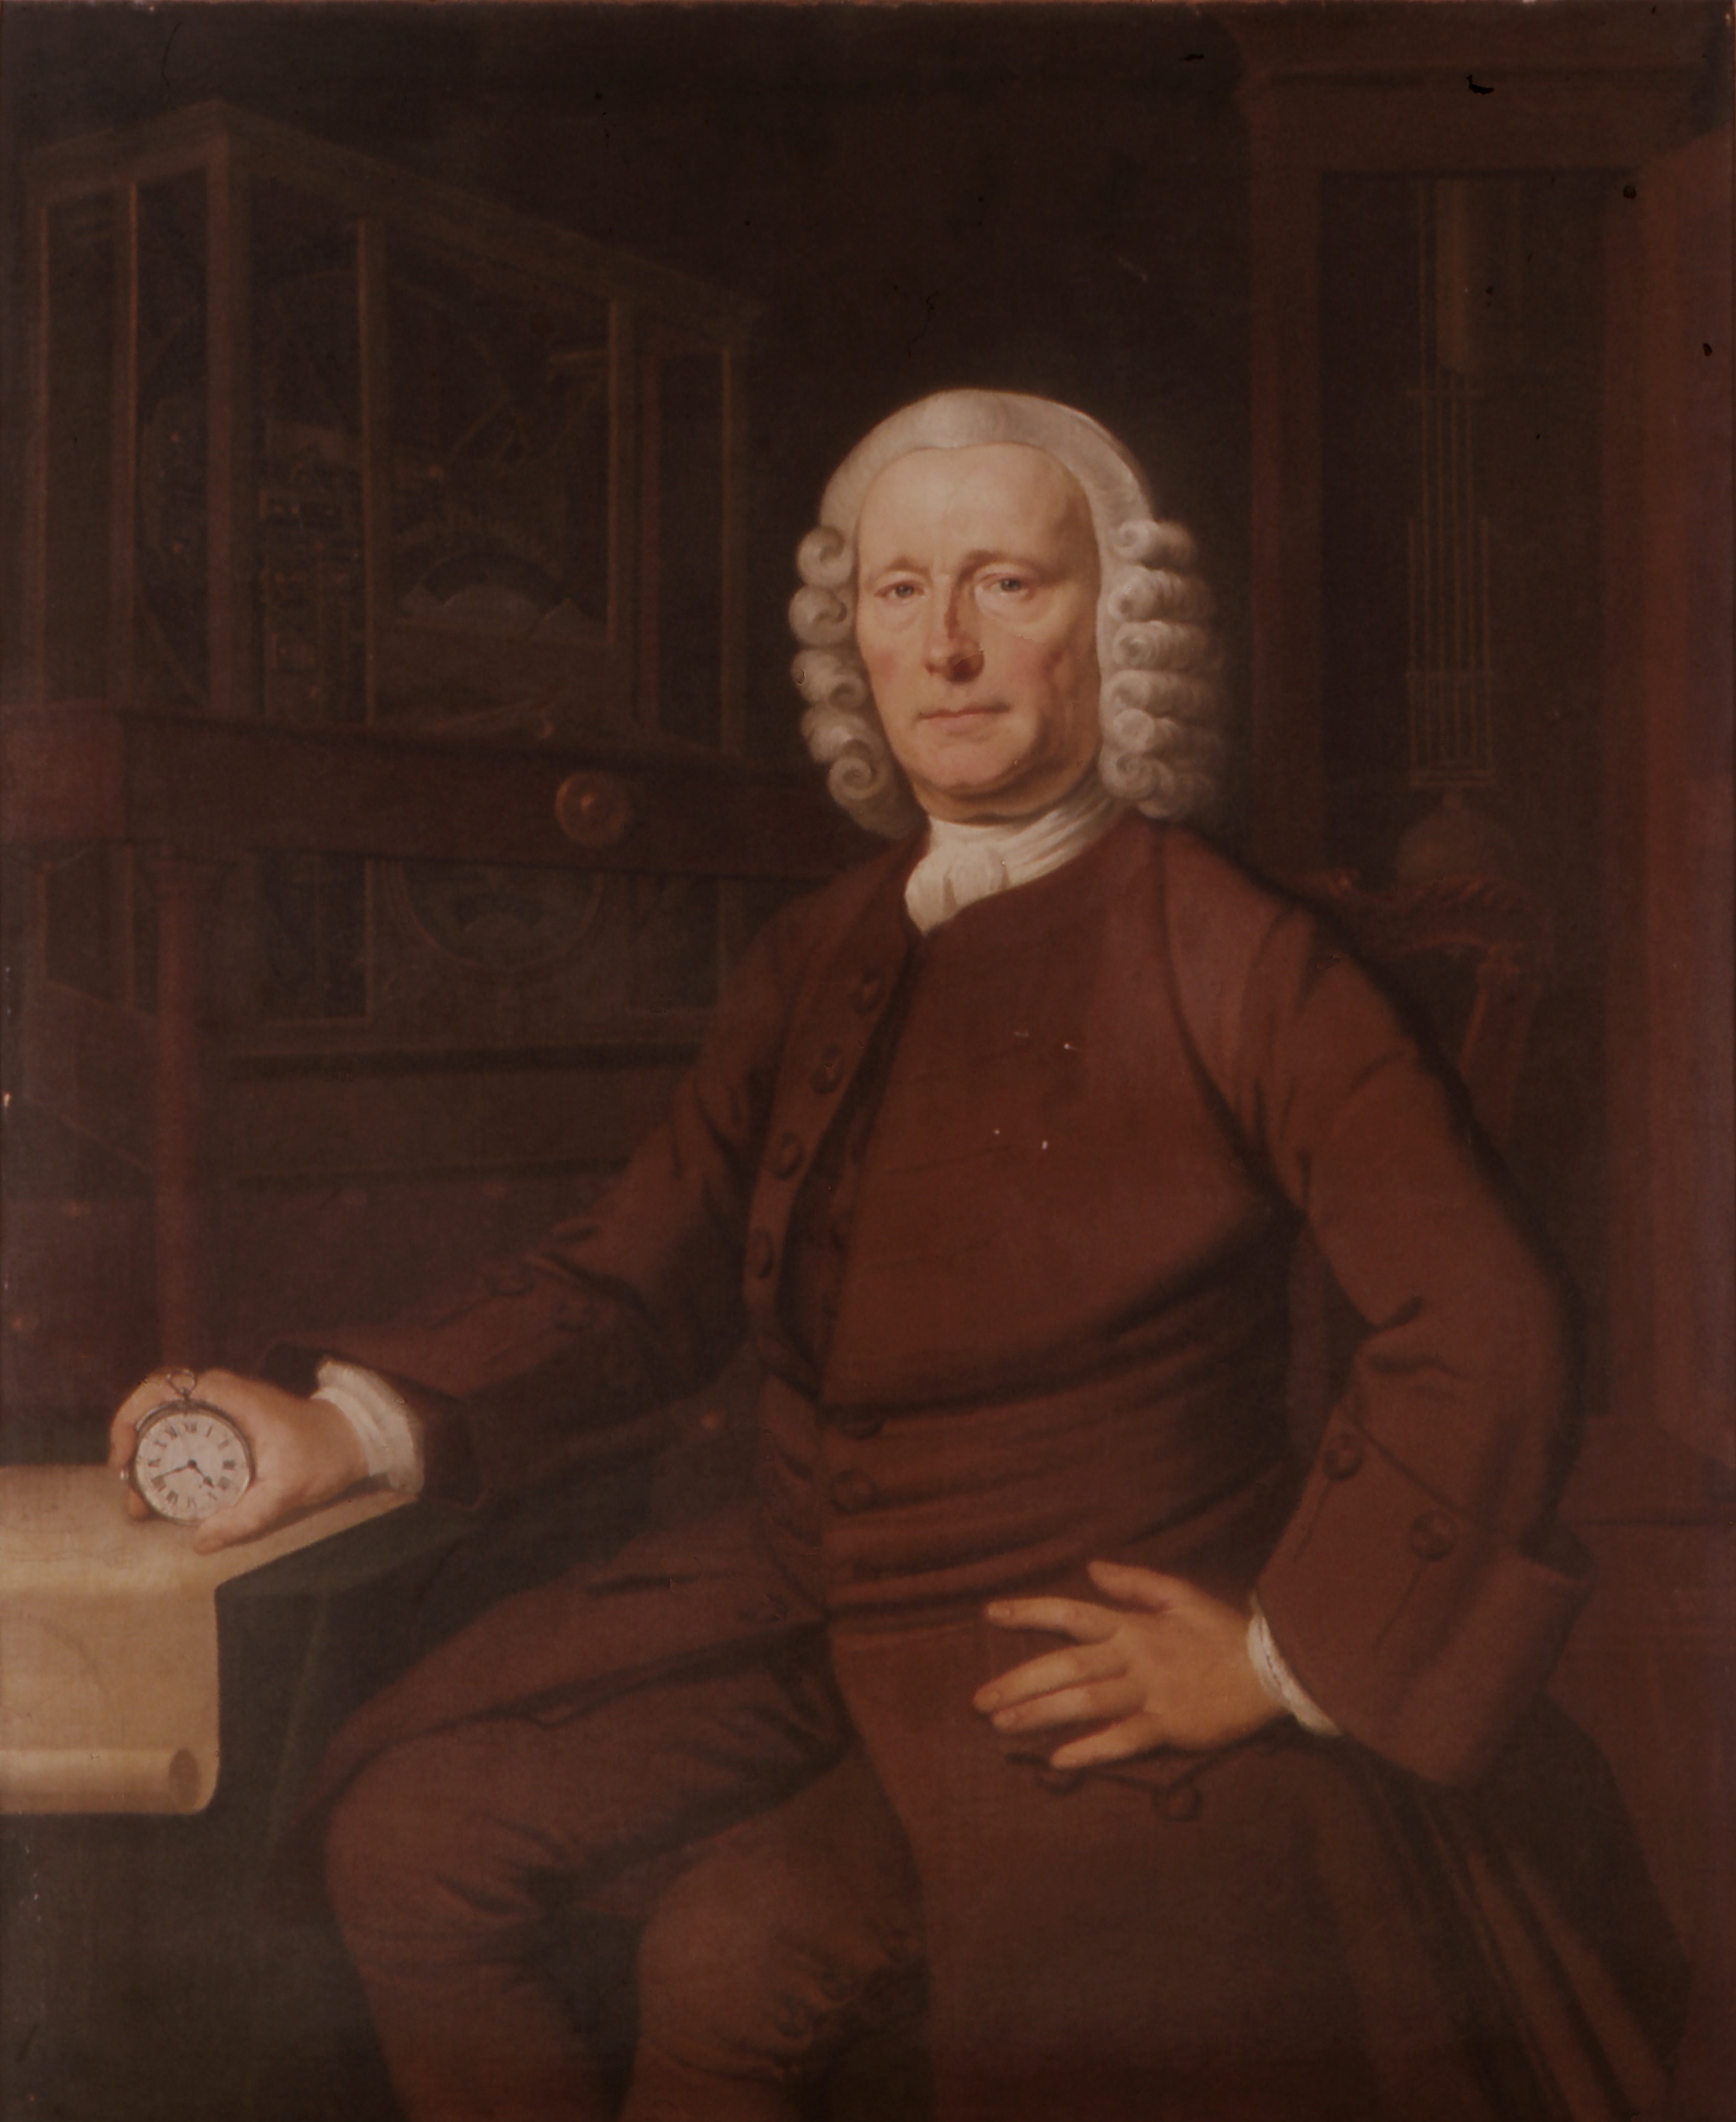 John Harrison, (1693-1776). Inventor of the marine chronometer in 1757. A self-educated English carpenter and clockmaker who invented the marine chronometer, solving the problem of calculating longitude while at sea. He was awarded a government prize for its accuracy (Heritage Images - Getty Images)